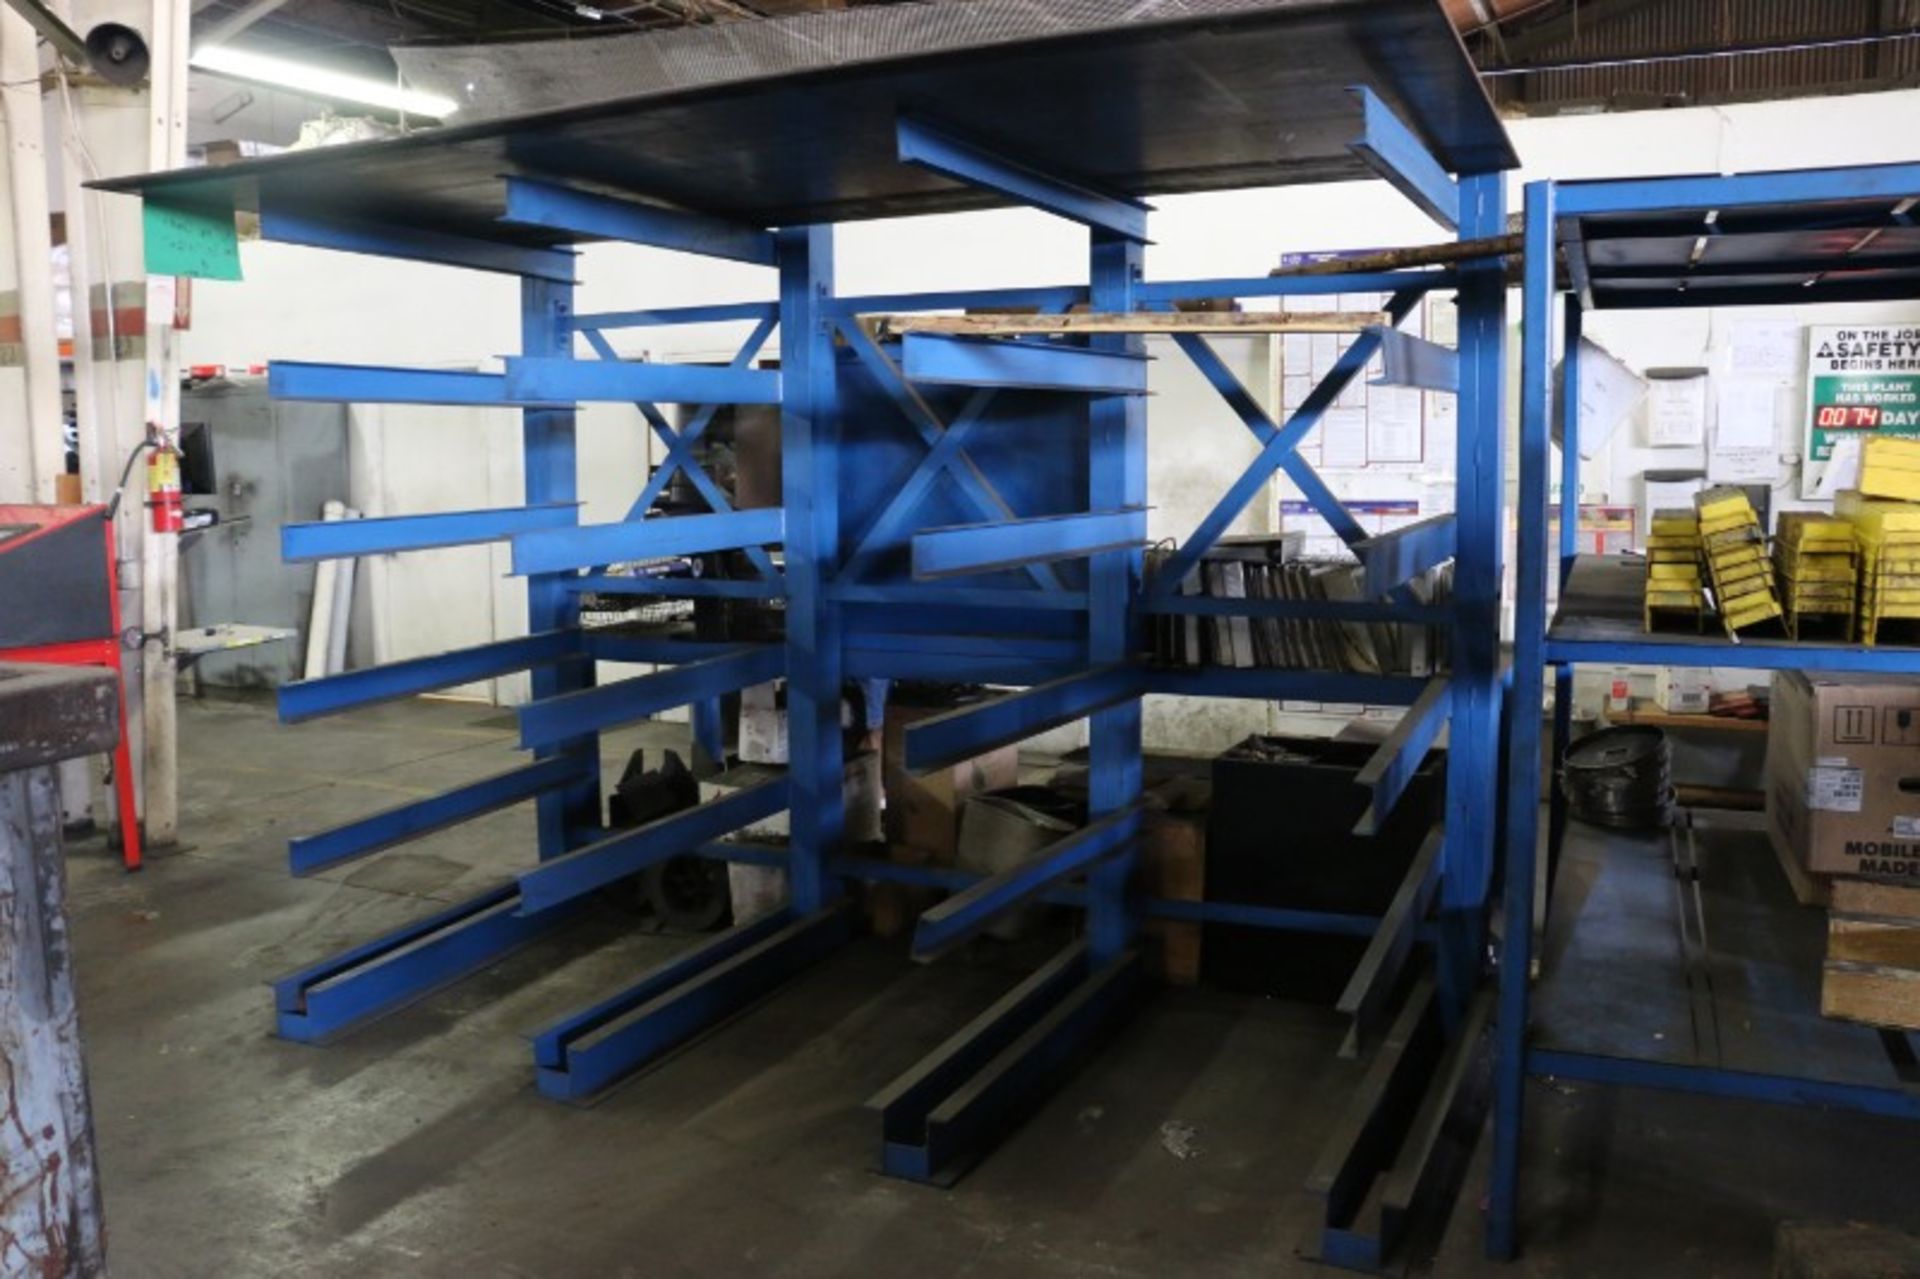 Cantilever Rack with Content, Rack, and Work Bench